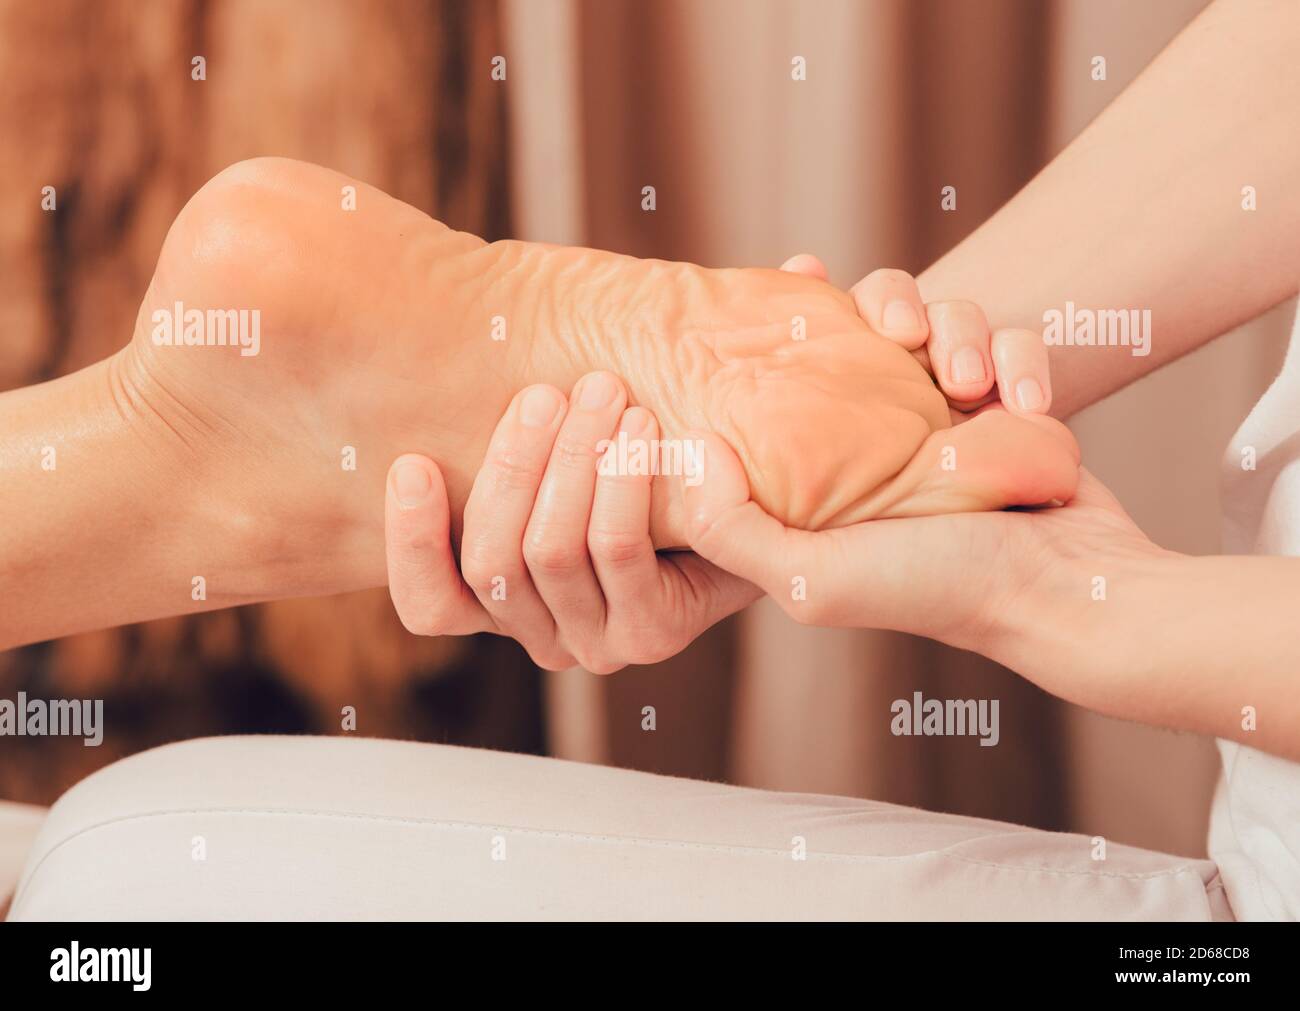 Foot reflexology, foot massage close-up. Masseur pushing on special points on the foot, massage treatment Stock Photo